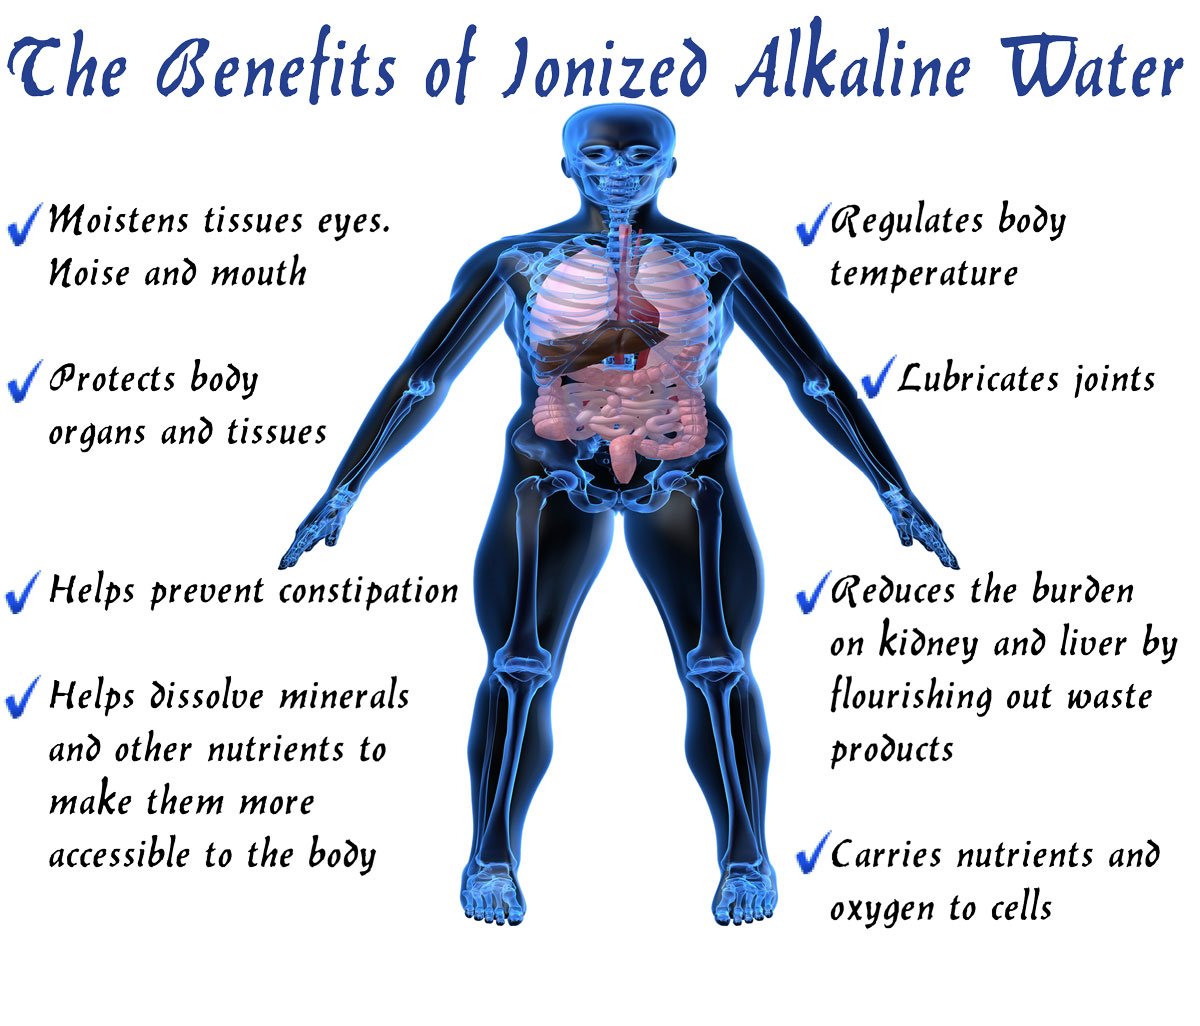 ionized alkaline water and its benefits